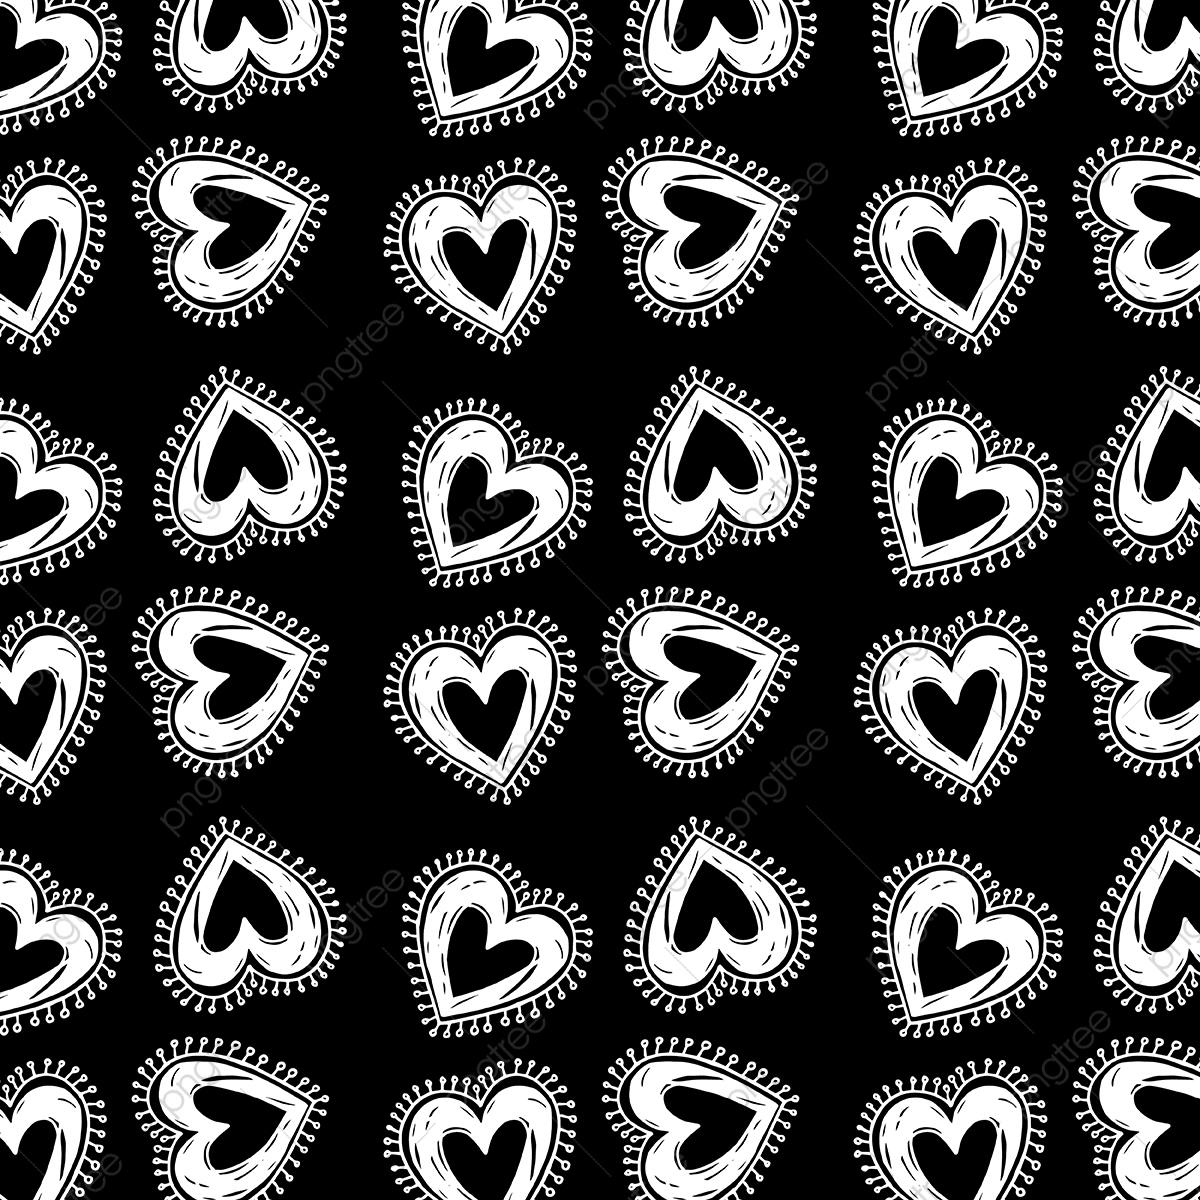 Black Valentines Vector HD Image, Black And White Valentine Pattern Background, Black, Heart, Wallpaper PNG Image For Free Download